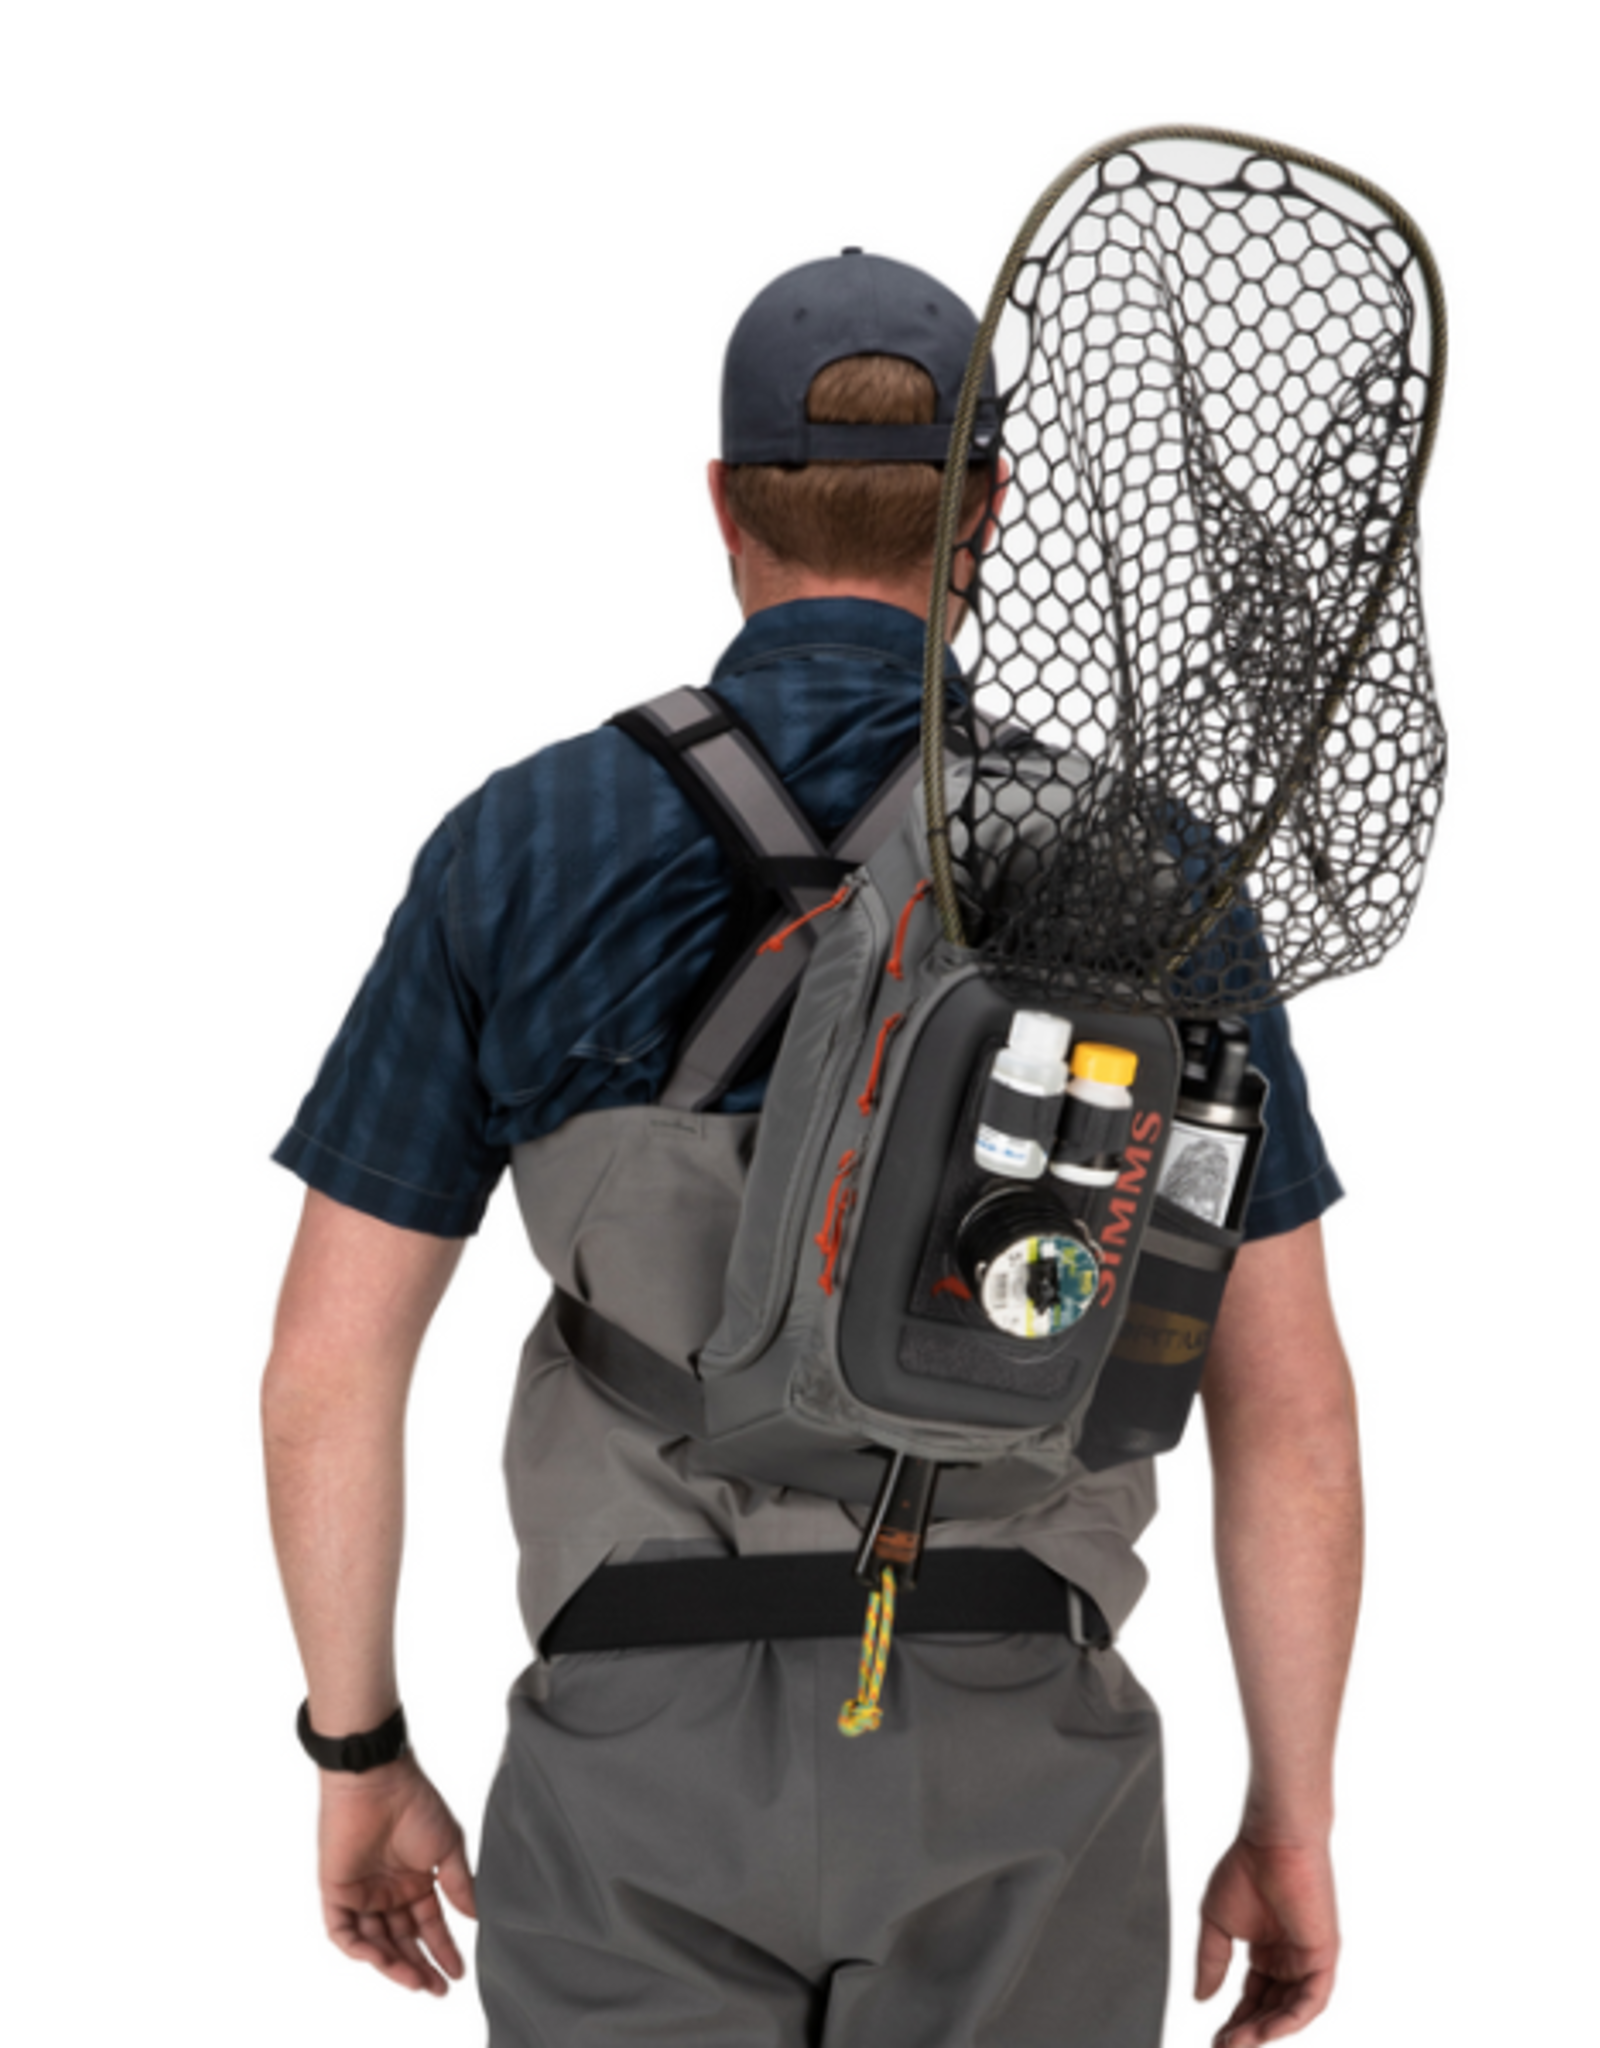 Fishing Packs and Slings by Simms, Patagonia, Fishpond